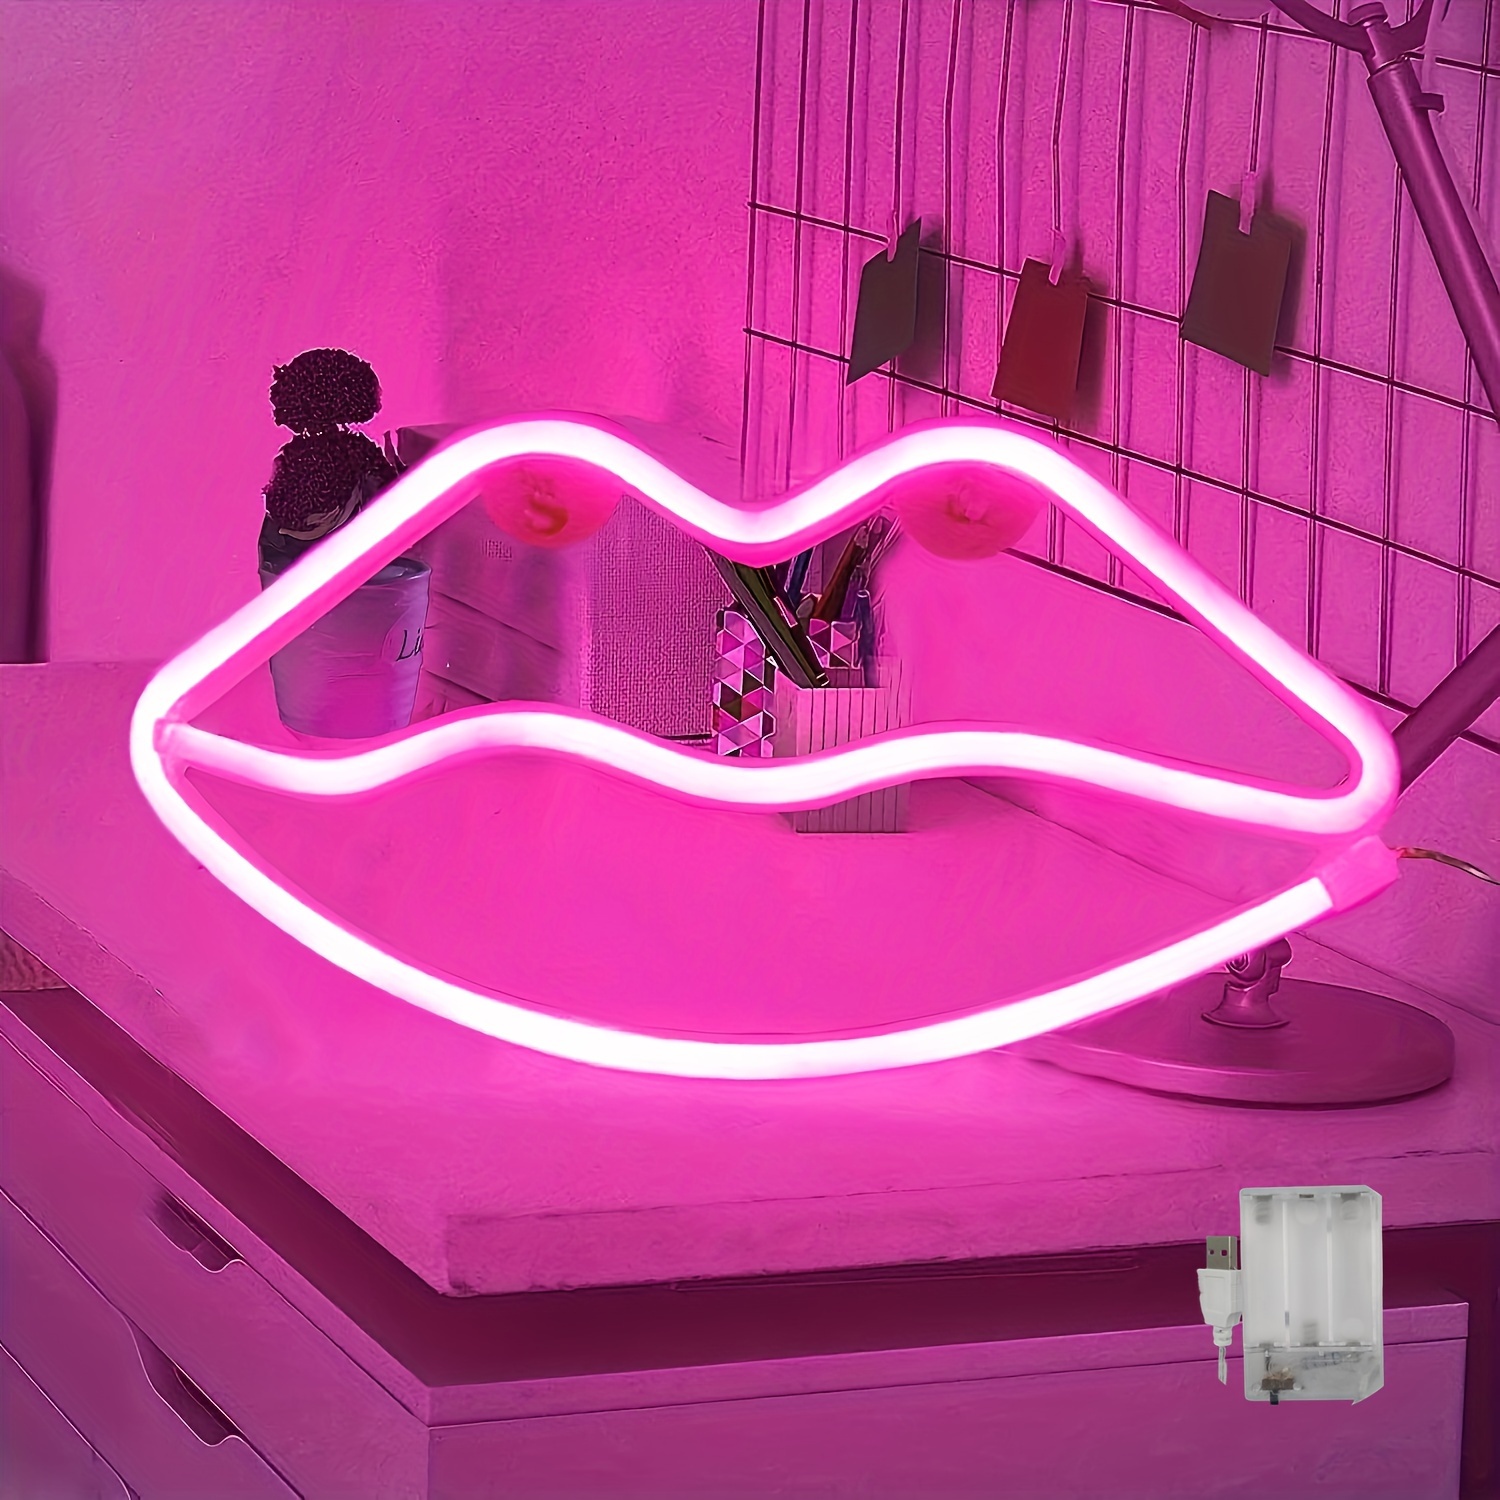 

1pc Pink Lip Neon Sign, Usb Or Battery Operated Romantic Led Neon Art Decorative Light, For Room, Living Room, Valentine's Day, Wedding Anniversary, Bar, Party, Proposal Decoration